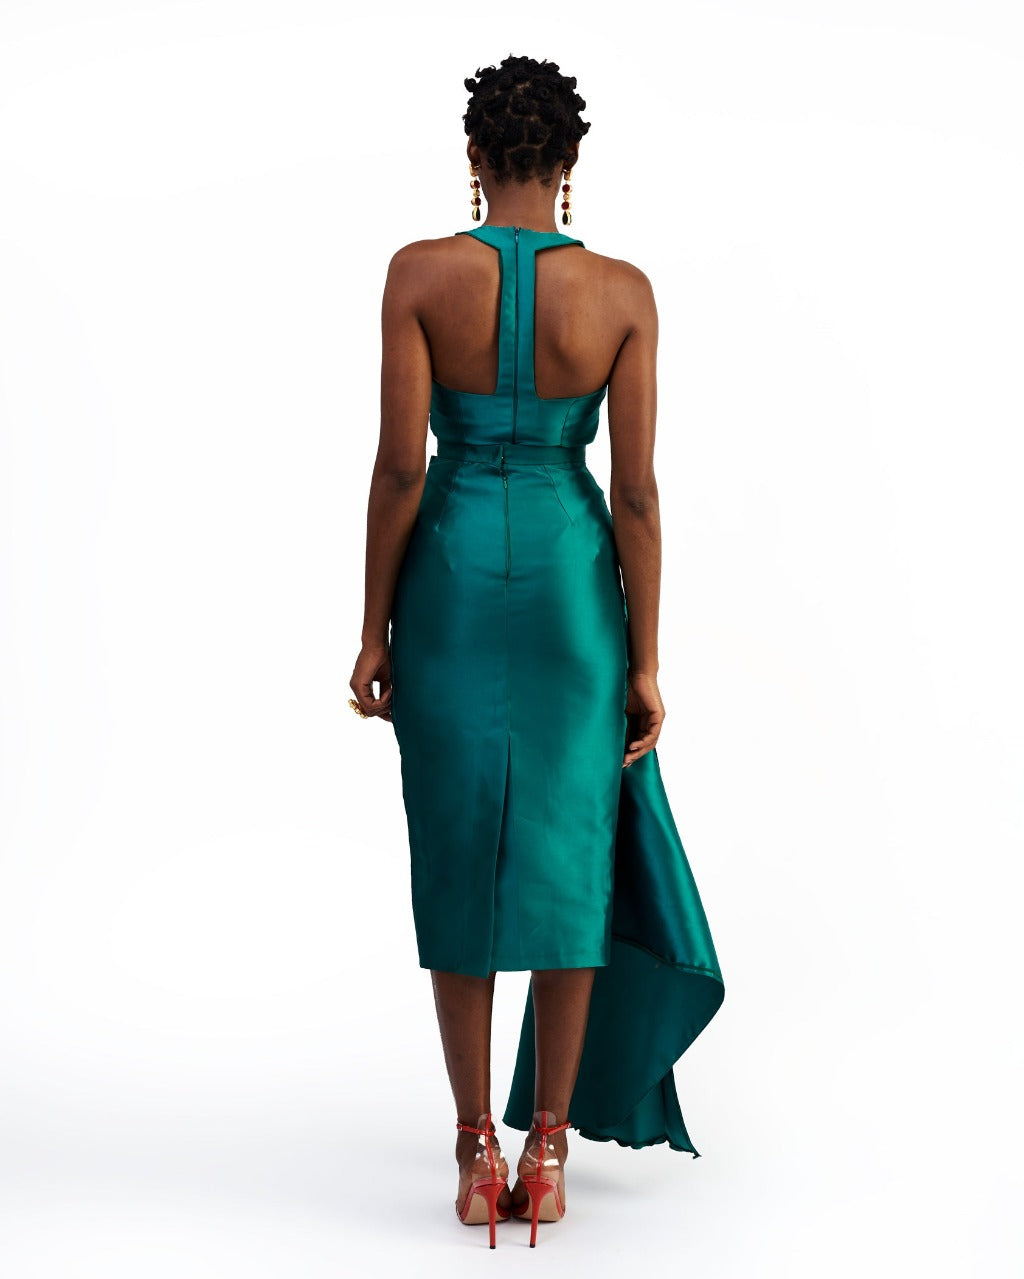 The back of a model wearing a green silk satin top and skirt